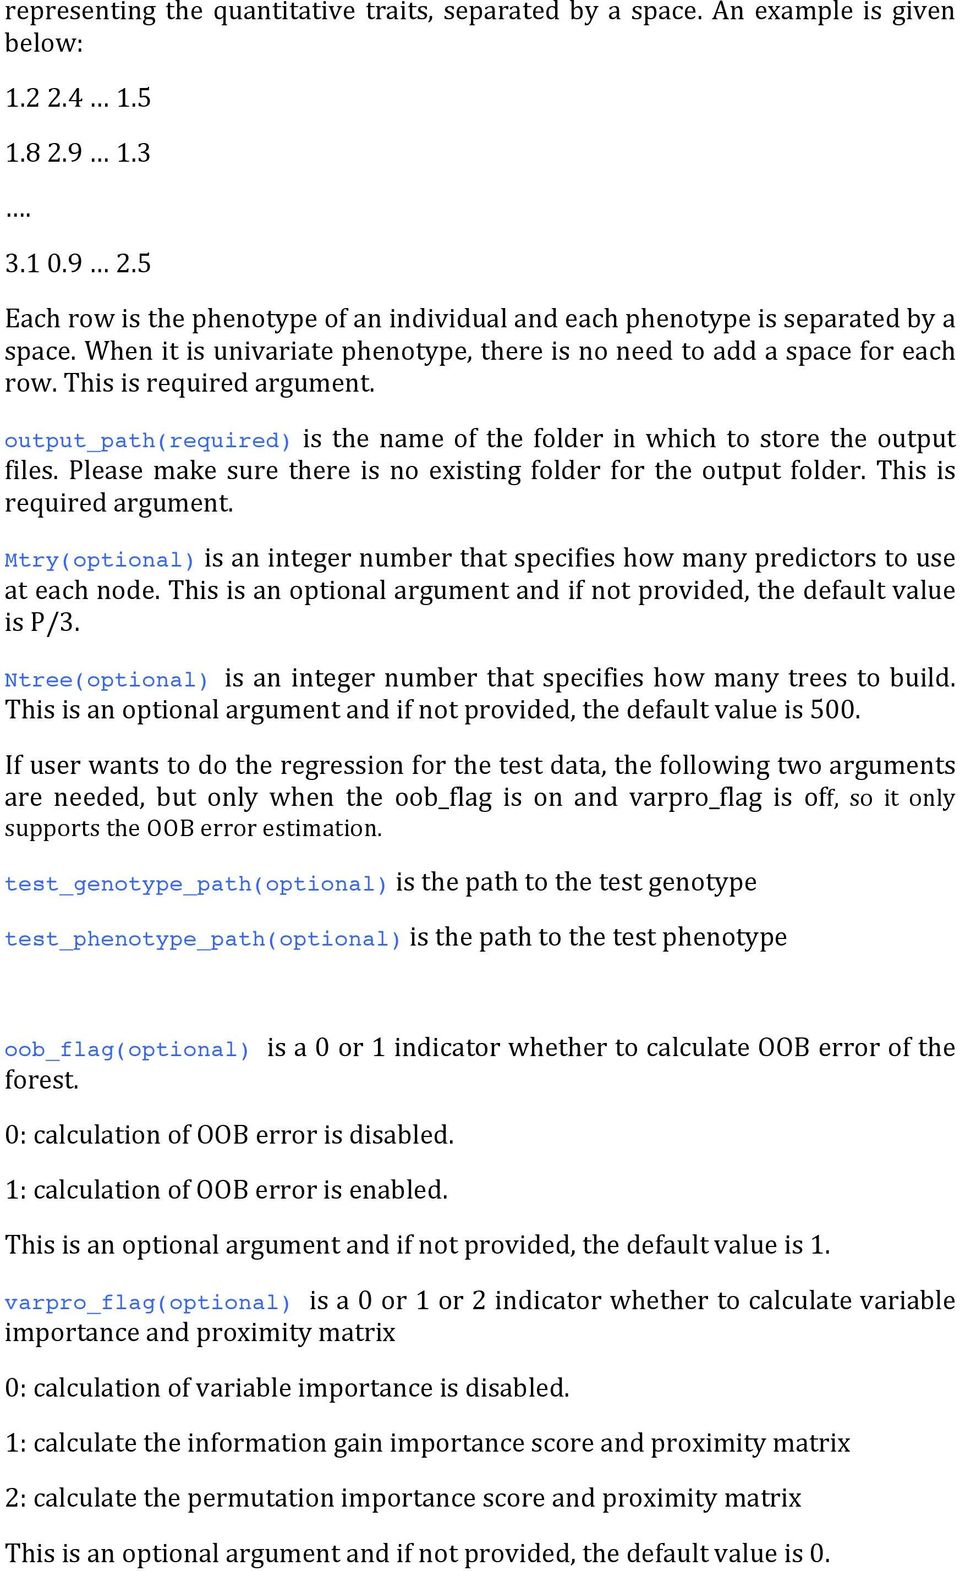 output_path(required) is the name of the folder in which to store the output files. Please make sure there is no existing folder for the output folder. This is required argument.